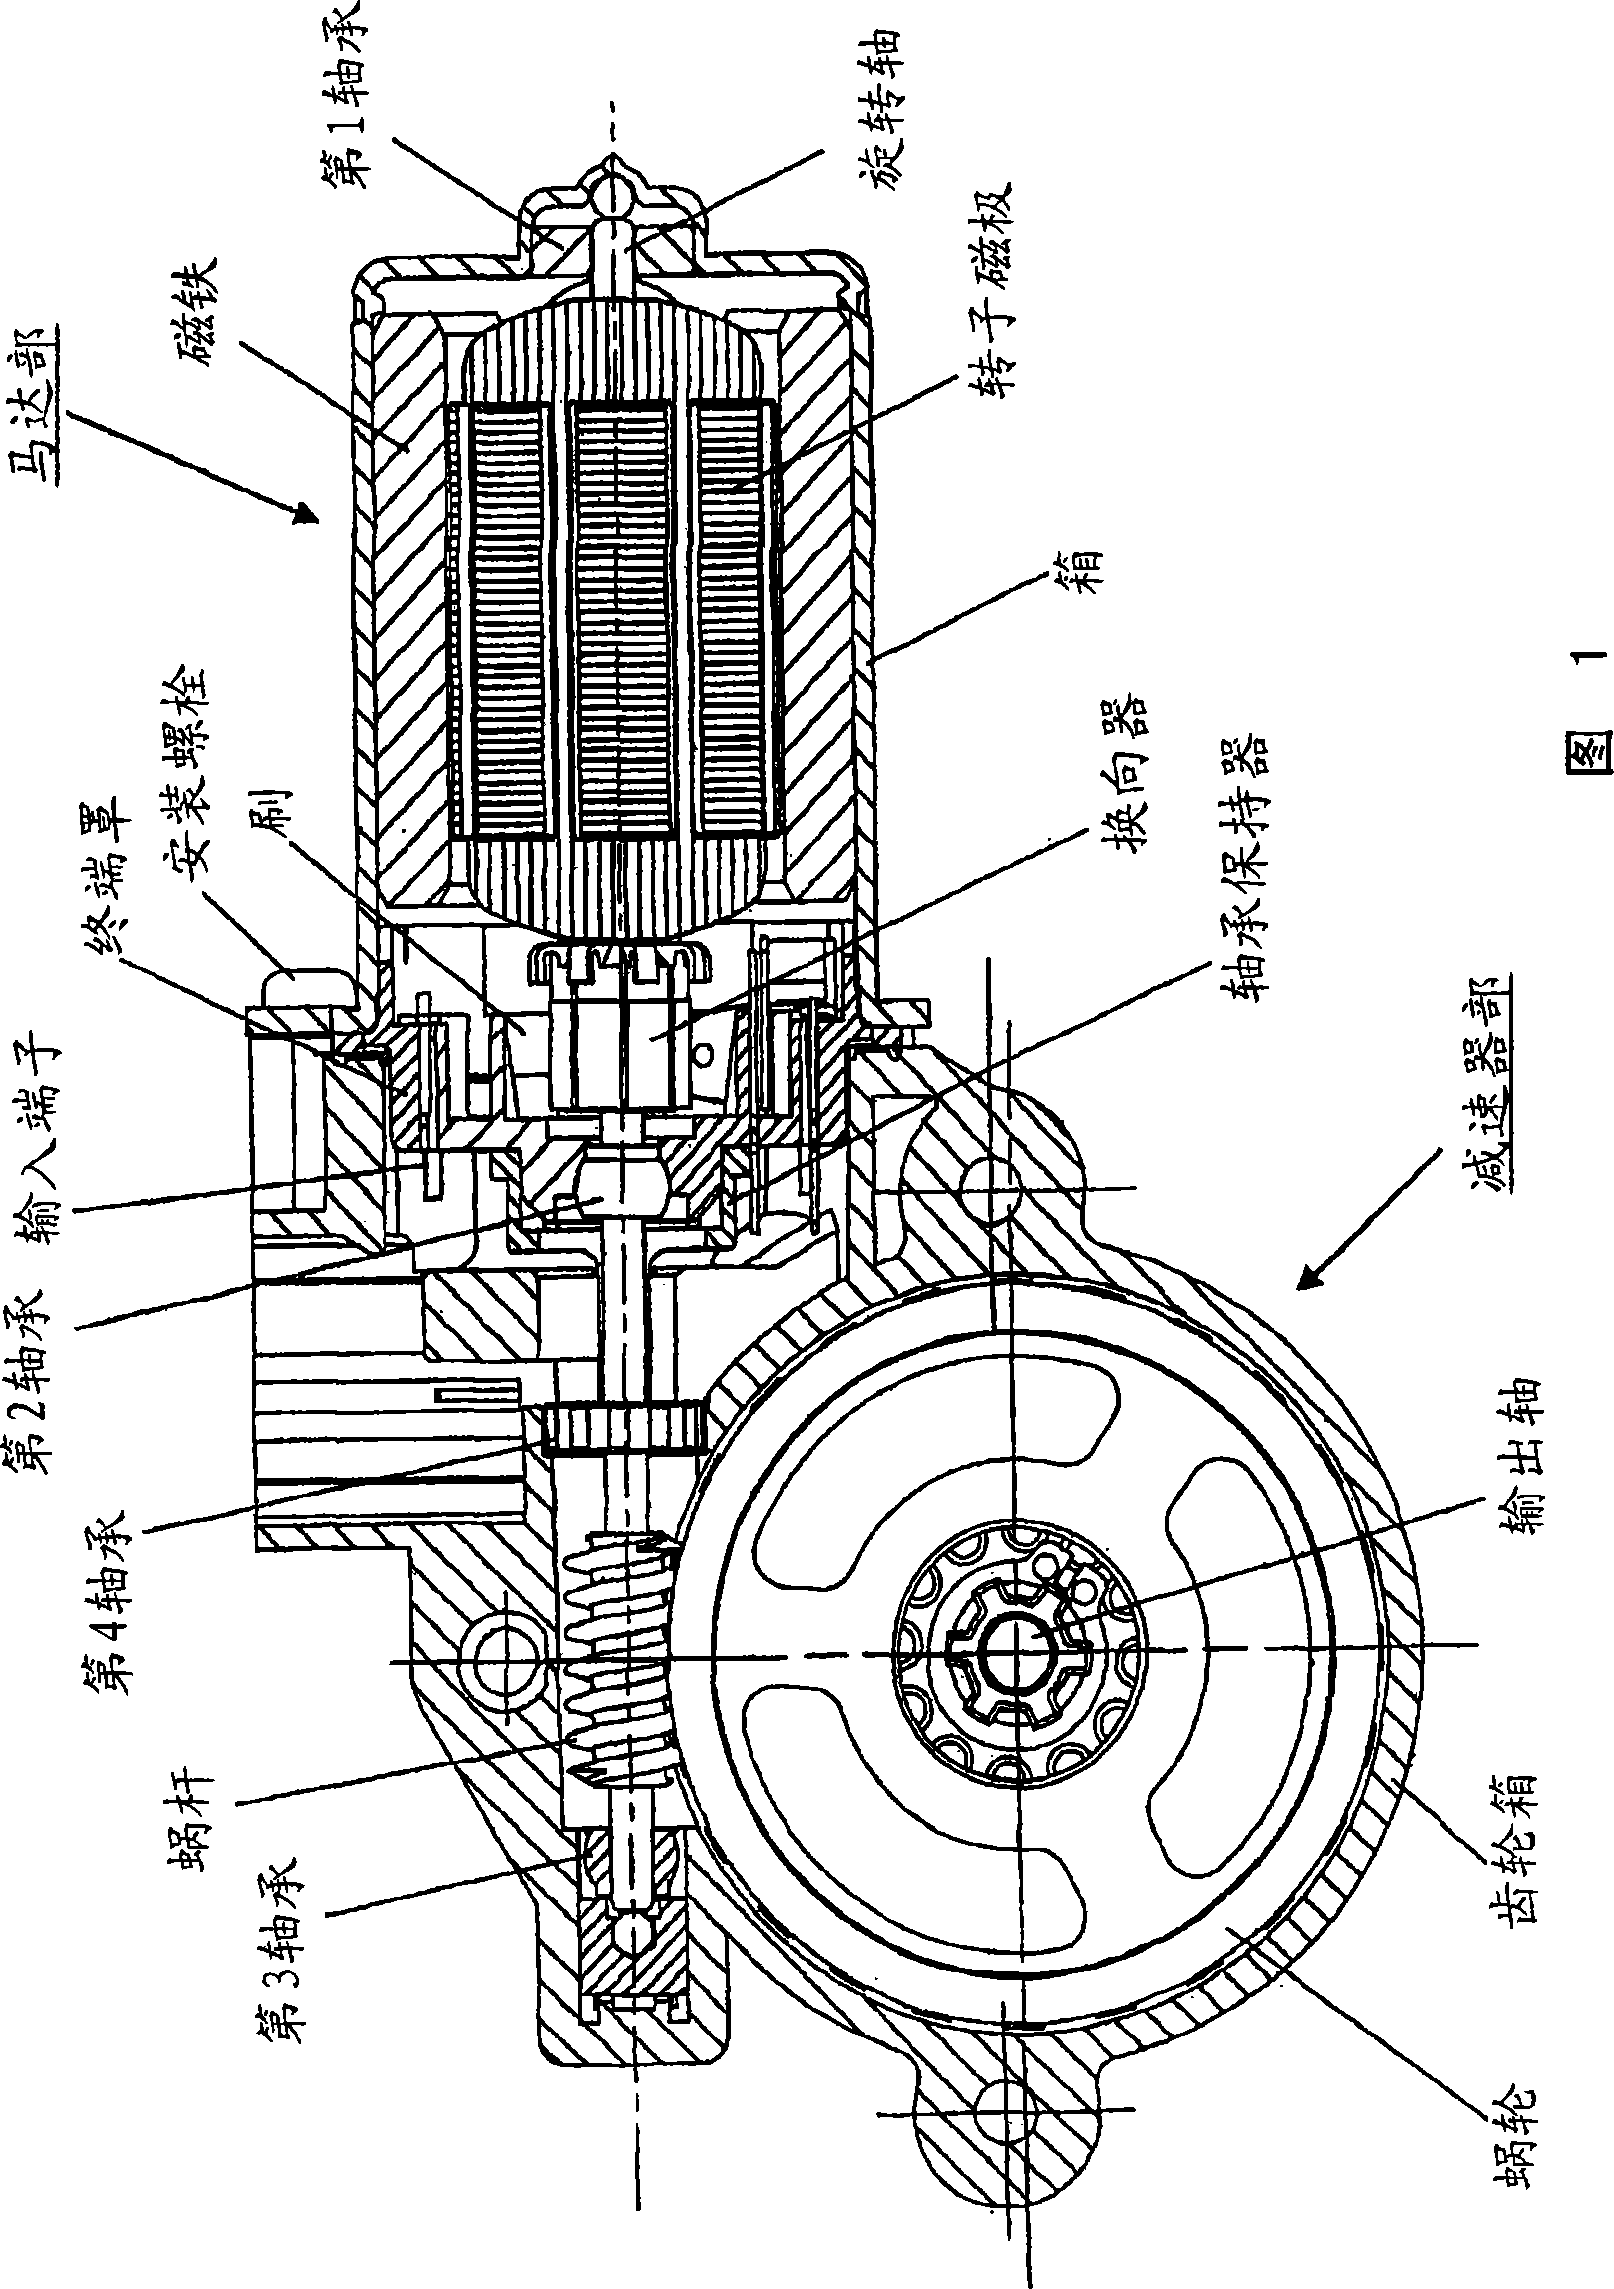 Motor equipped with reducer and method of manufacturing the same